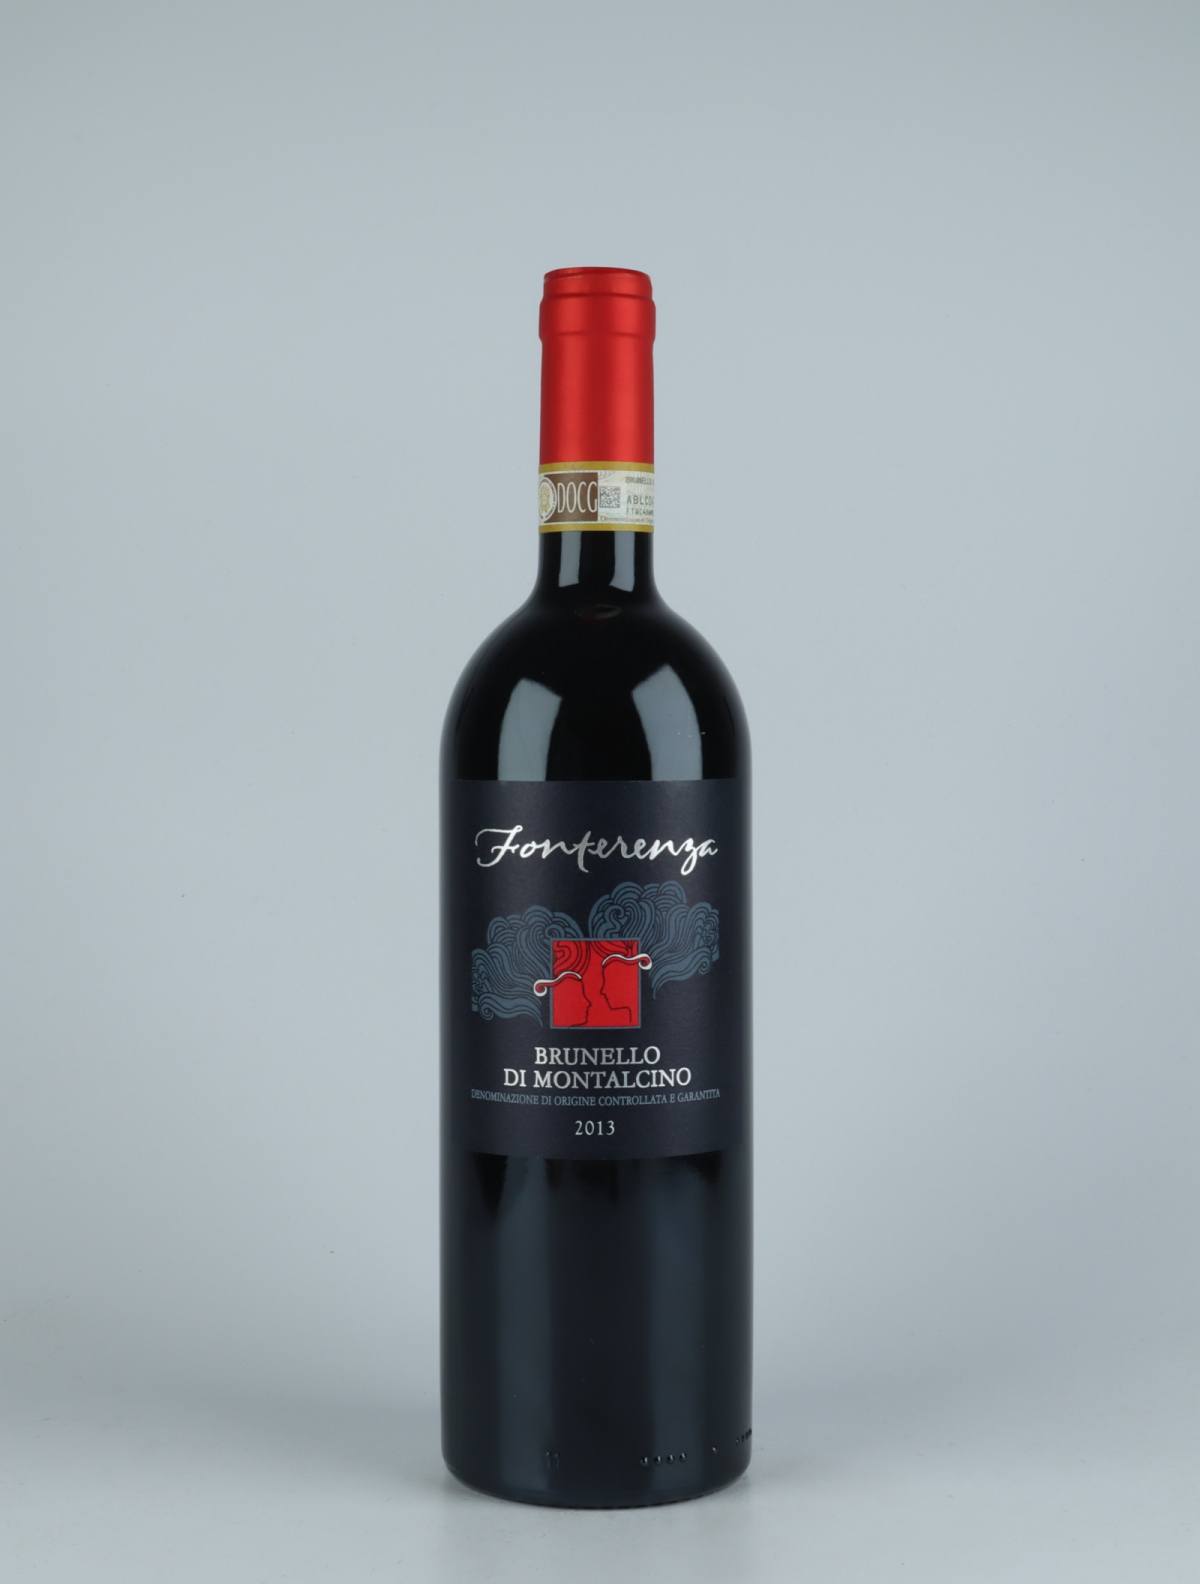 A bottle 2013 Brunello di Montalcino Red wine from Fonterenza, Tuscany in Italy